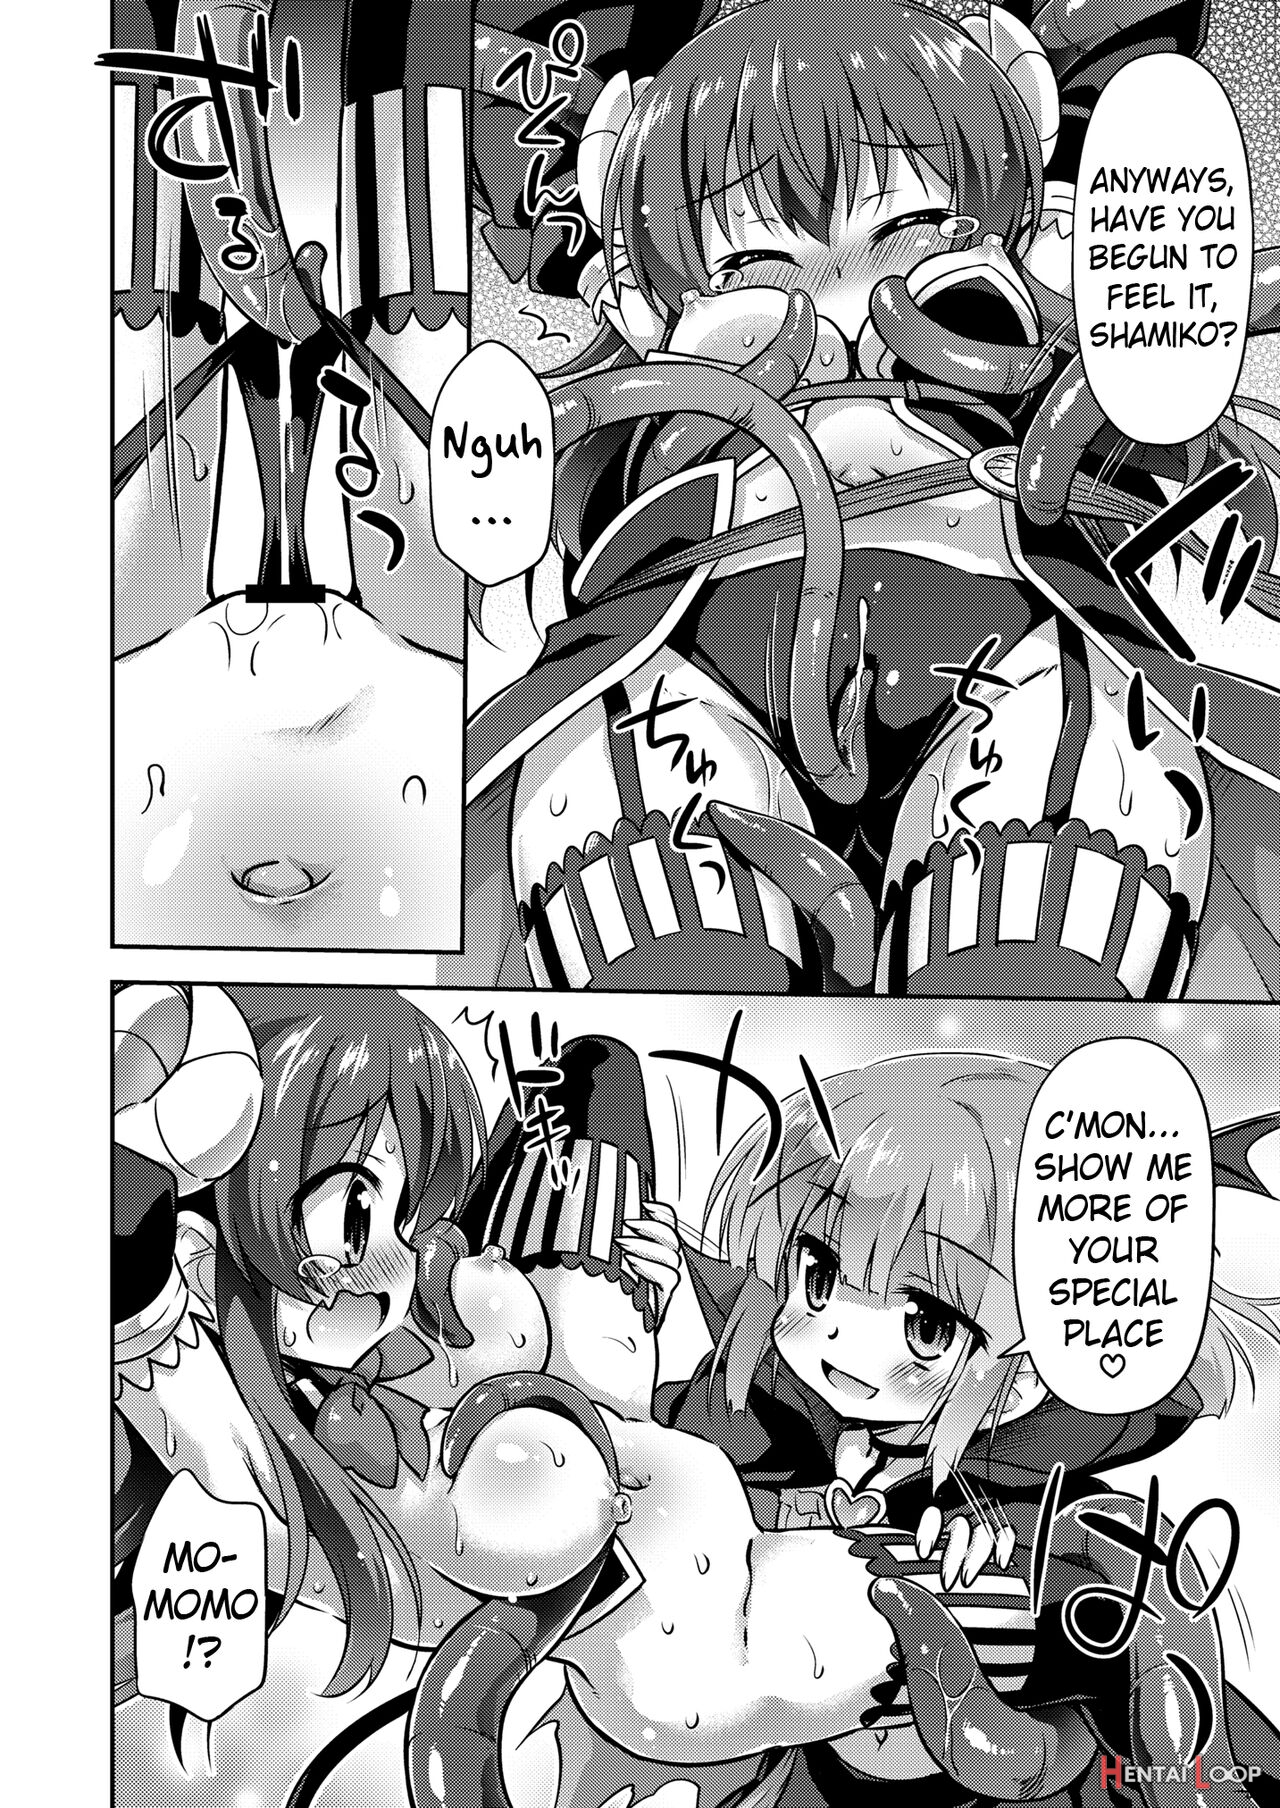 The Lewd Demon In Your Town page 7